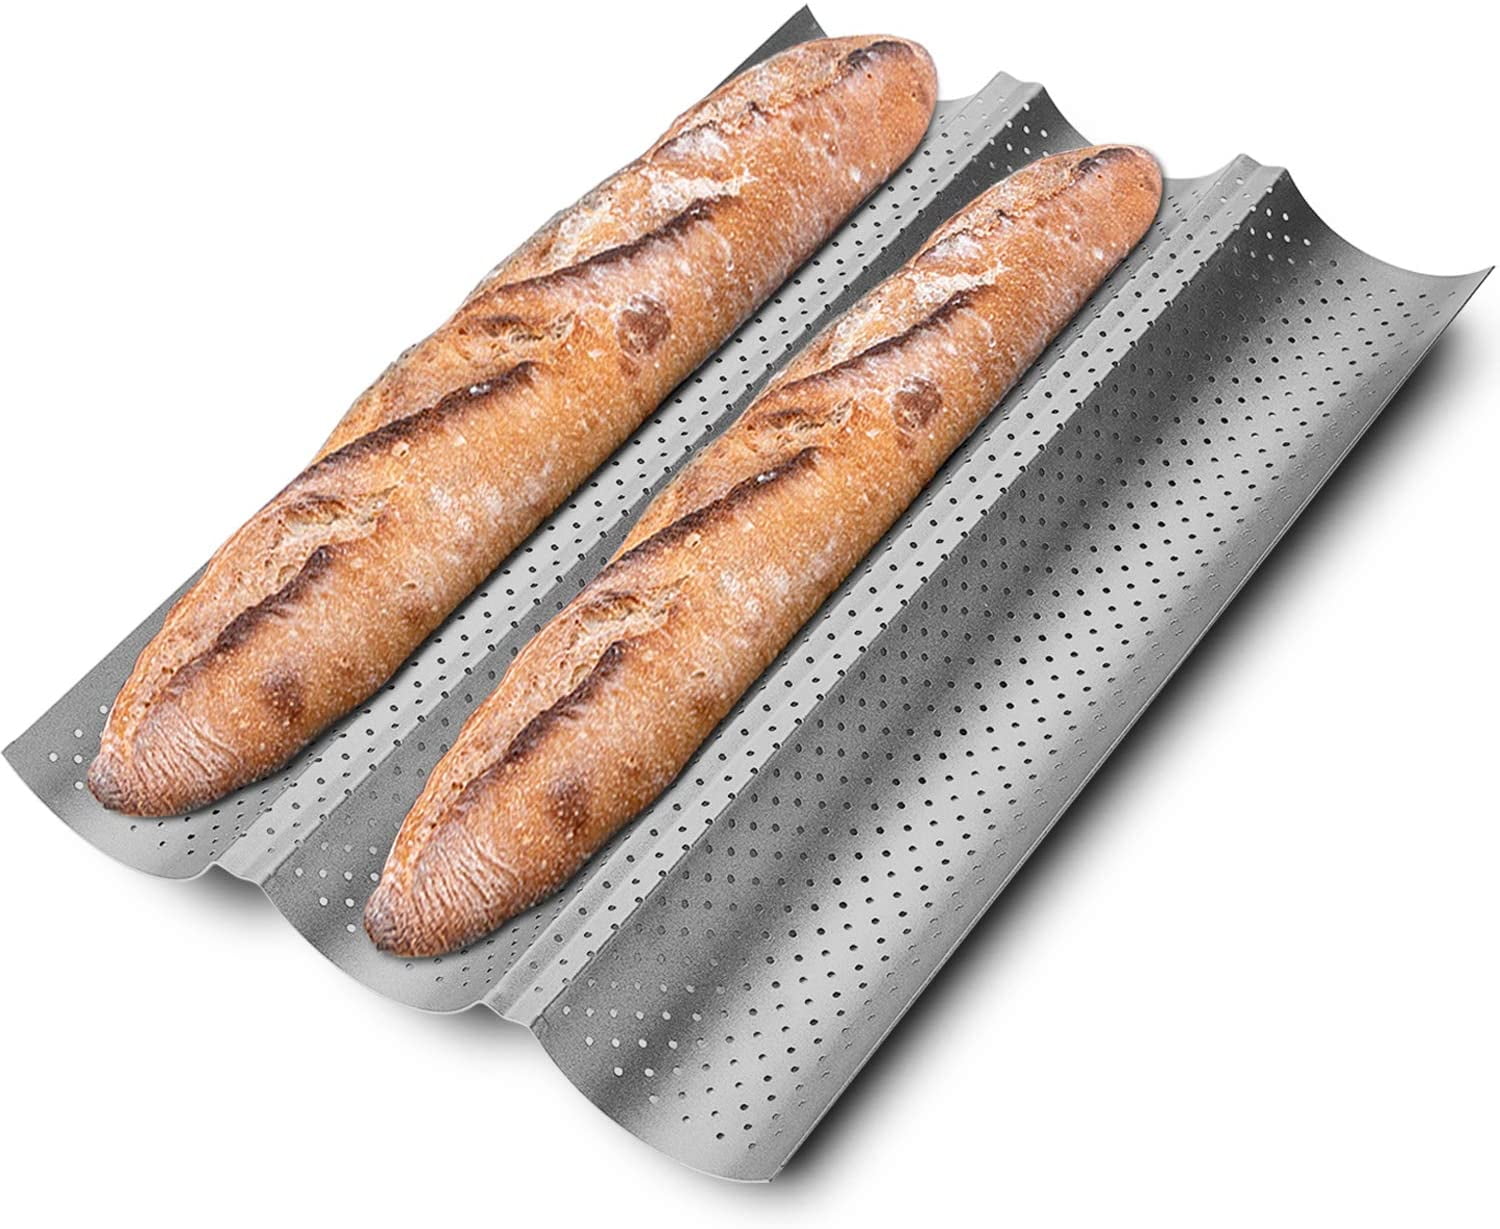 15”x6.3” Carbon Steel Perforated French Bread Pan Bread Baking Pan Loaf Bake Mold Toast Perforated Bakers Molding Baguette mould Nonstick Baguette Bread Pans 